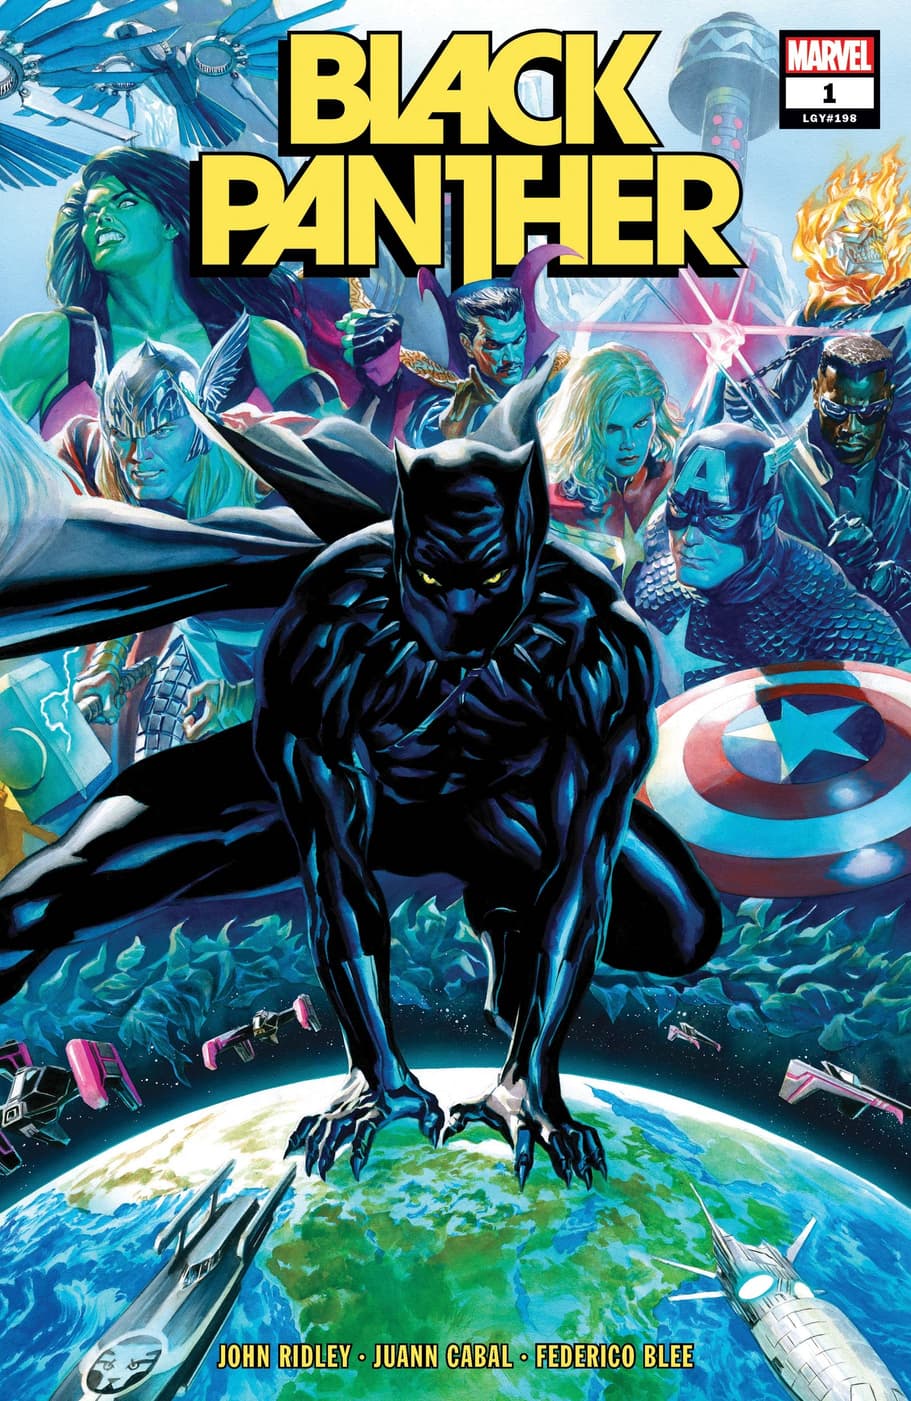 Cover to BLACK PANTHER (2021) #1 by artist Alex Ross.